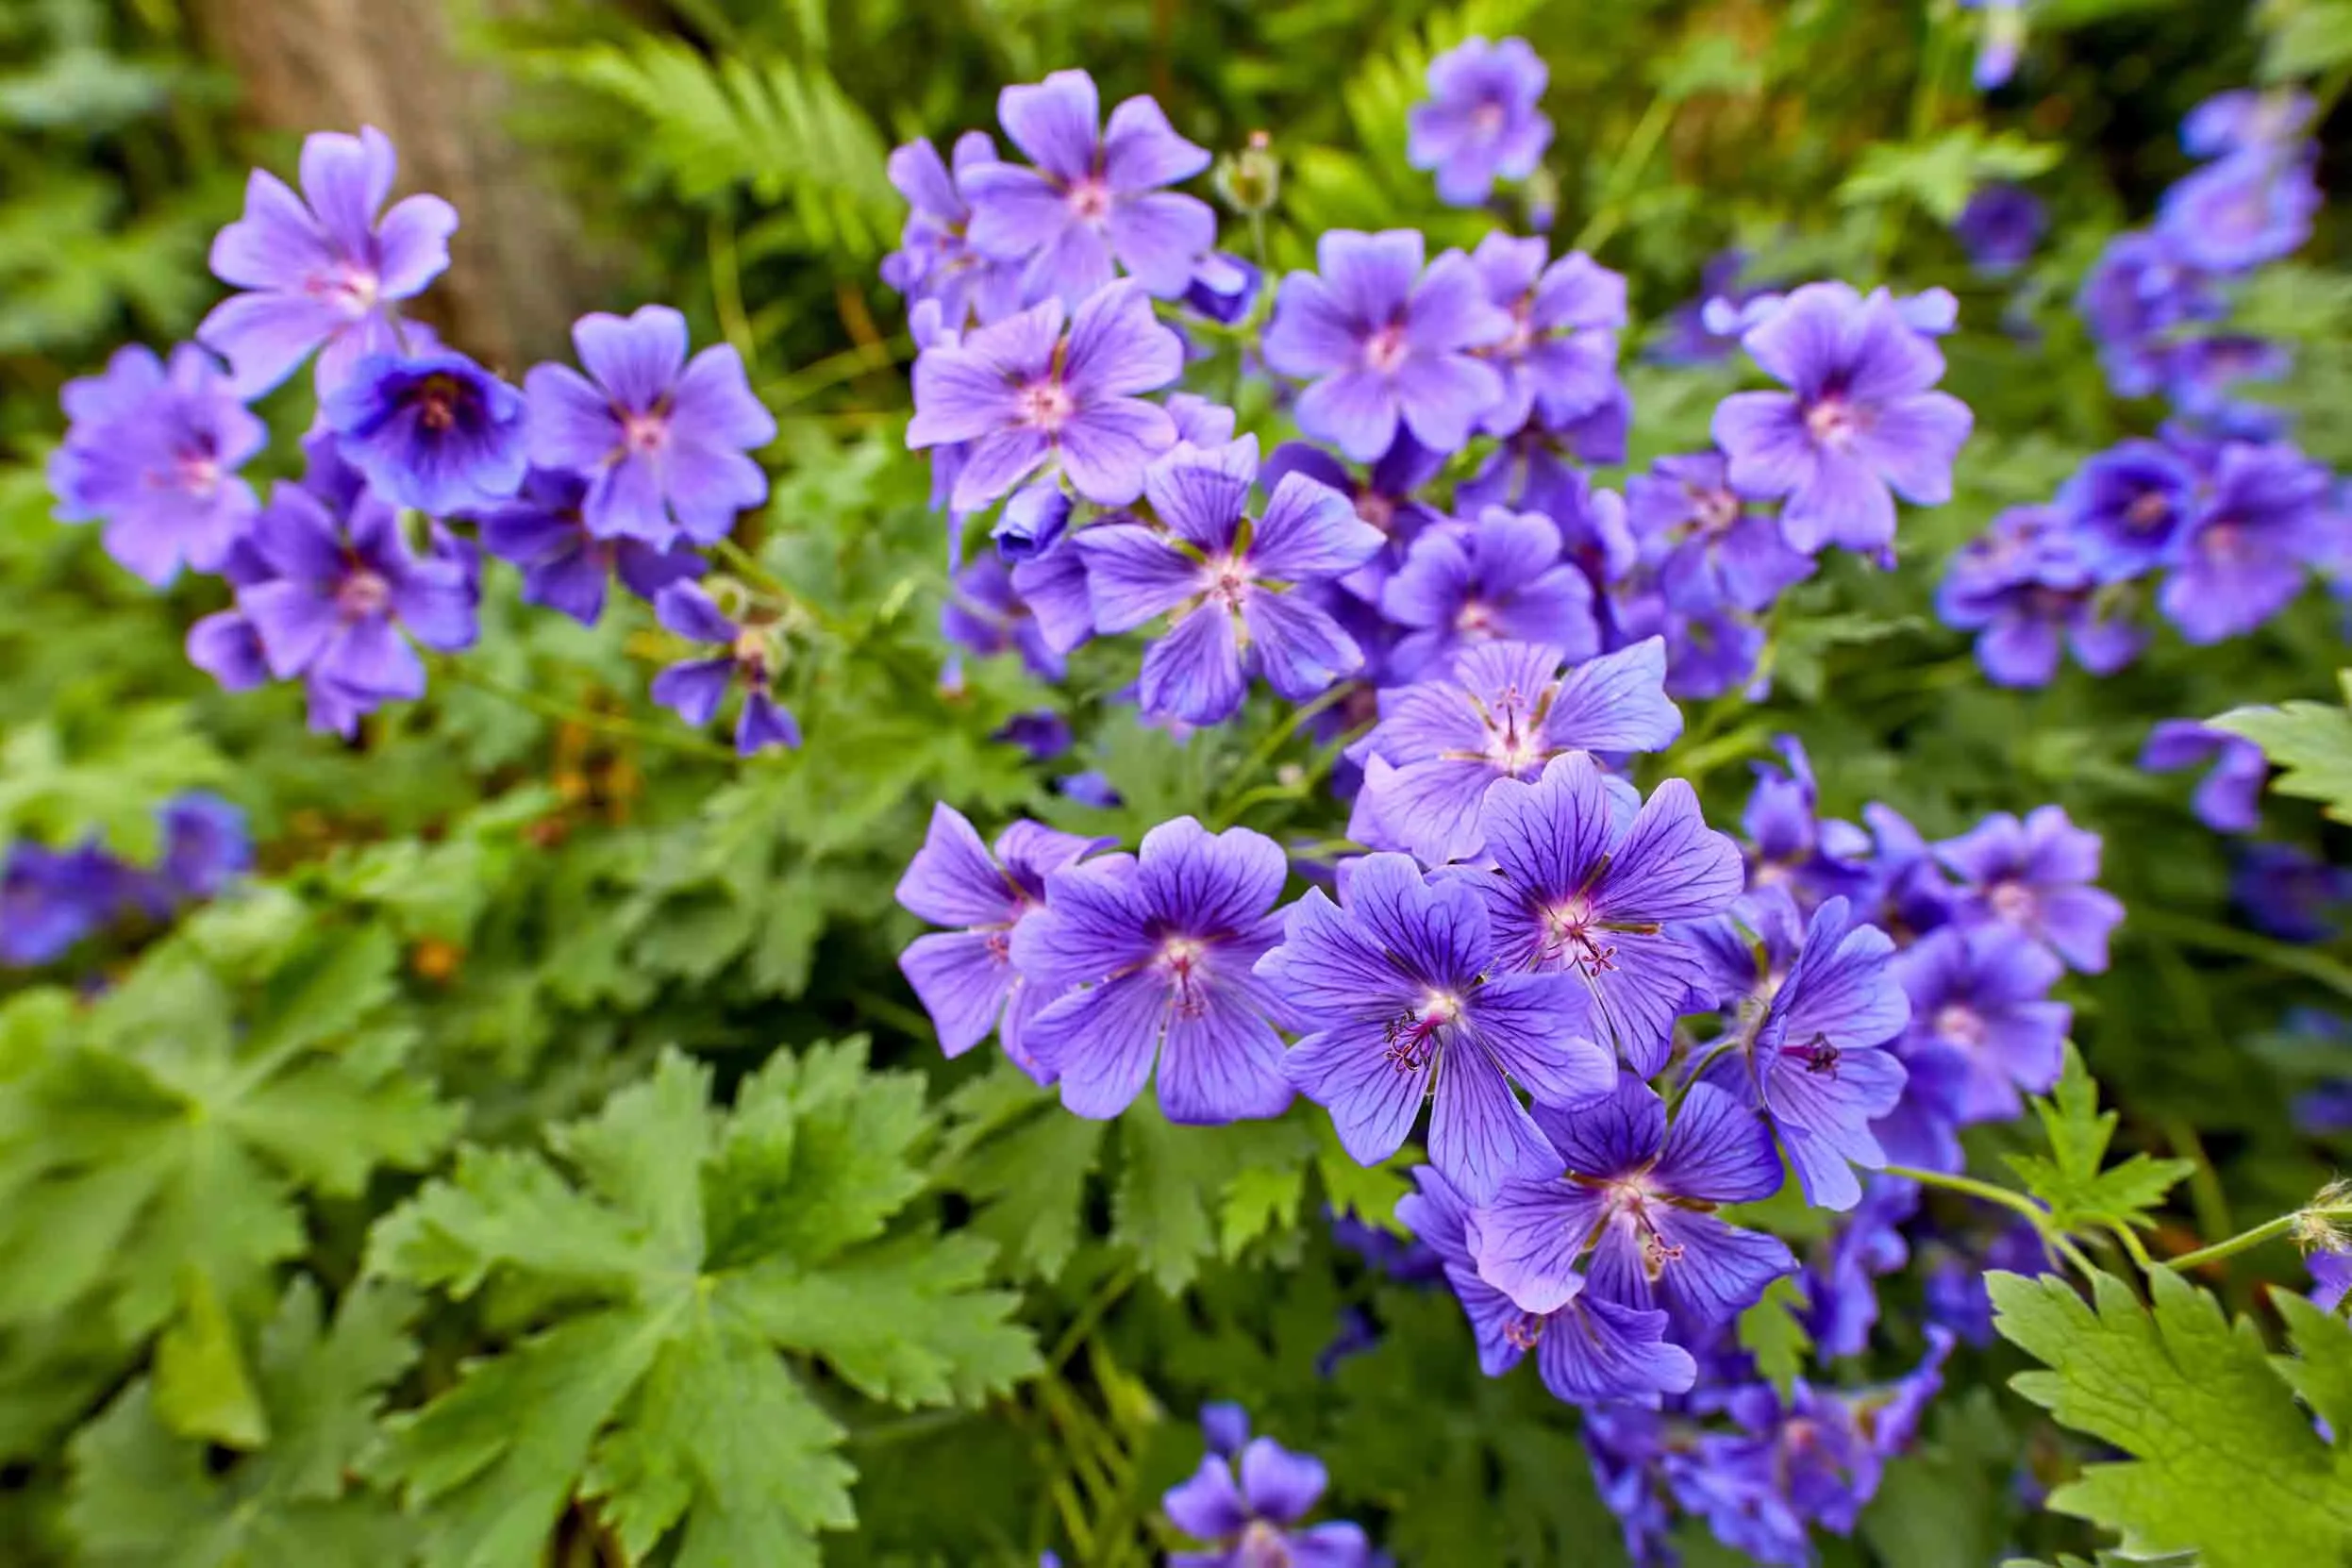 A close up of the purple flowers of Hardy geranium surrounded by green foliage.